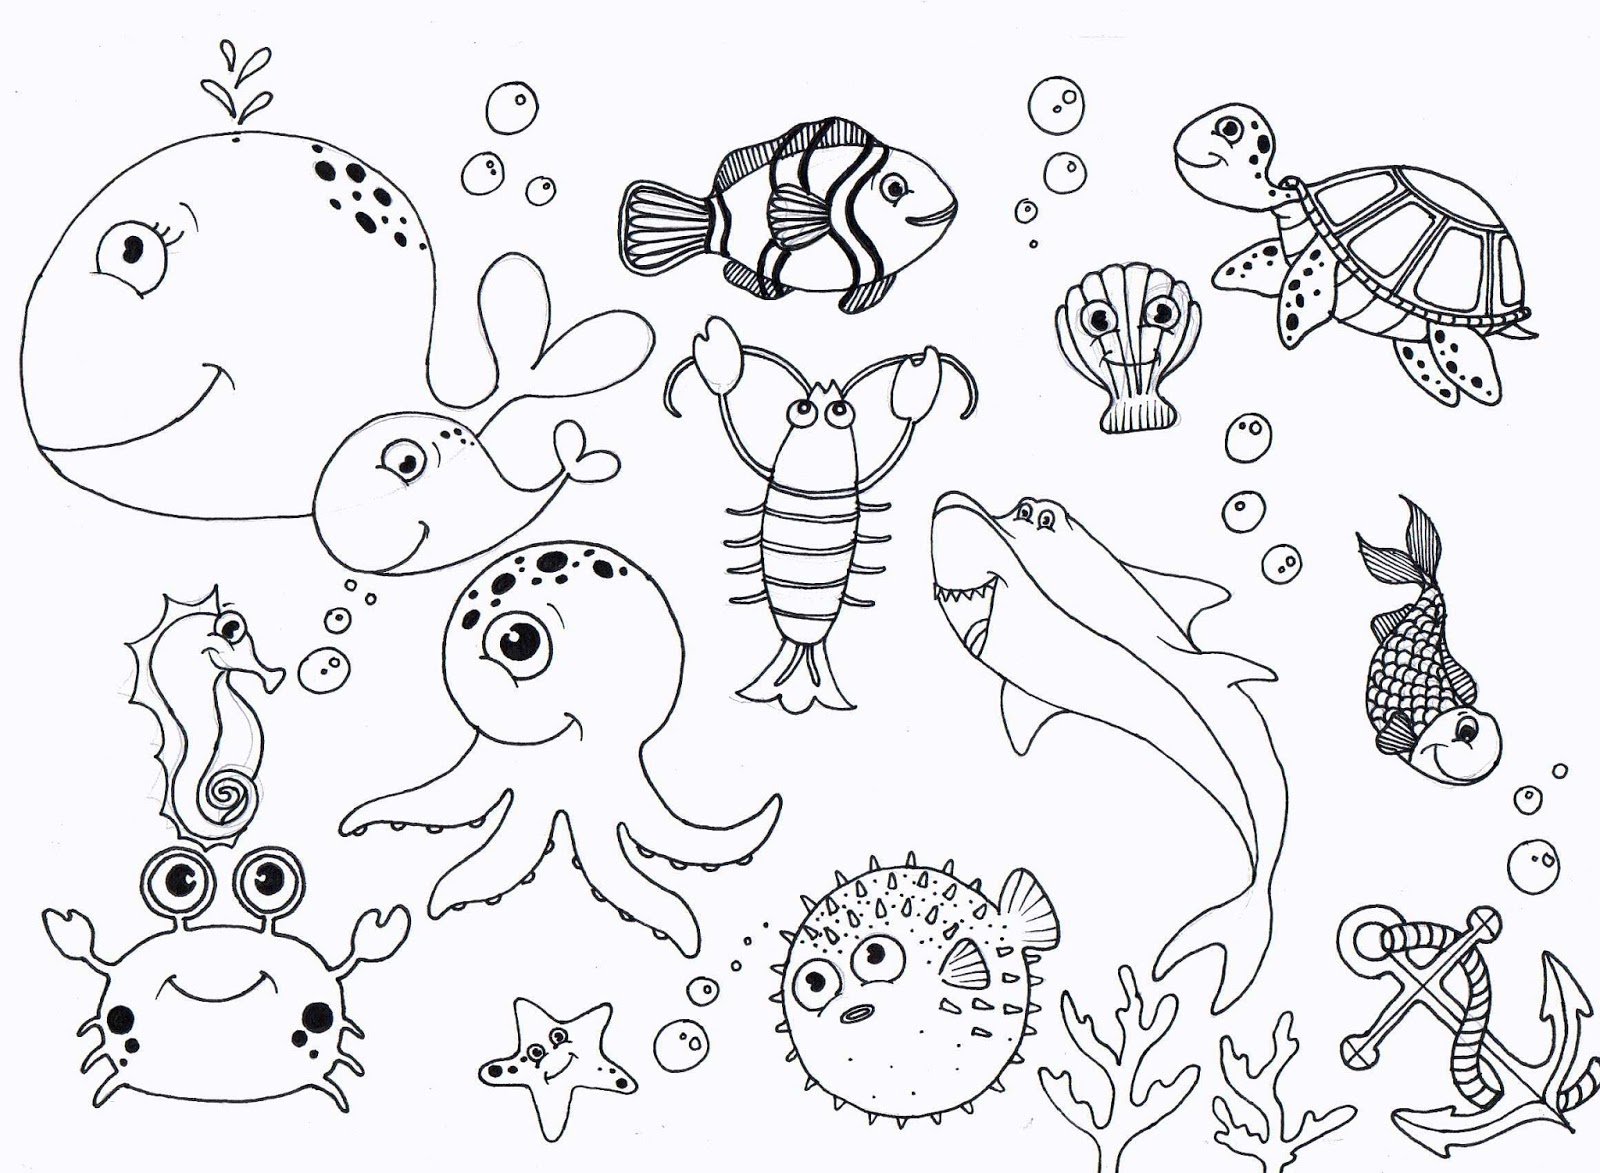 Download Free Under the Sea Coloring Pages to print for kids